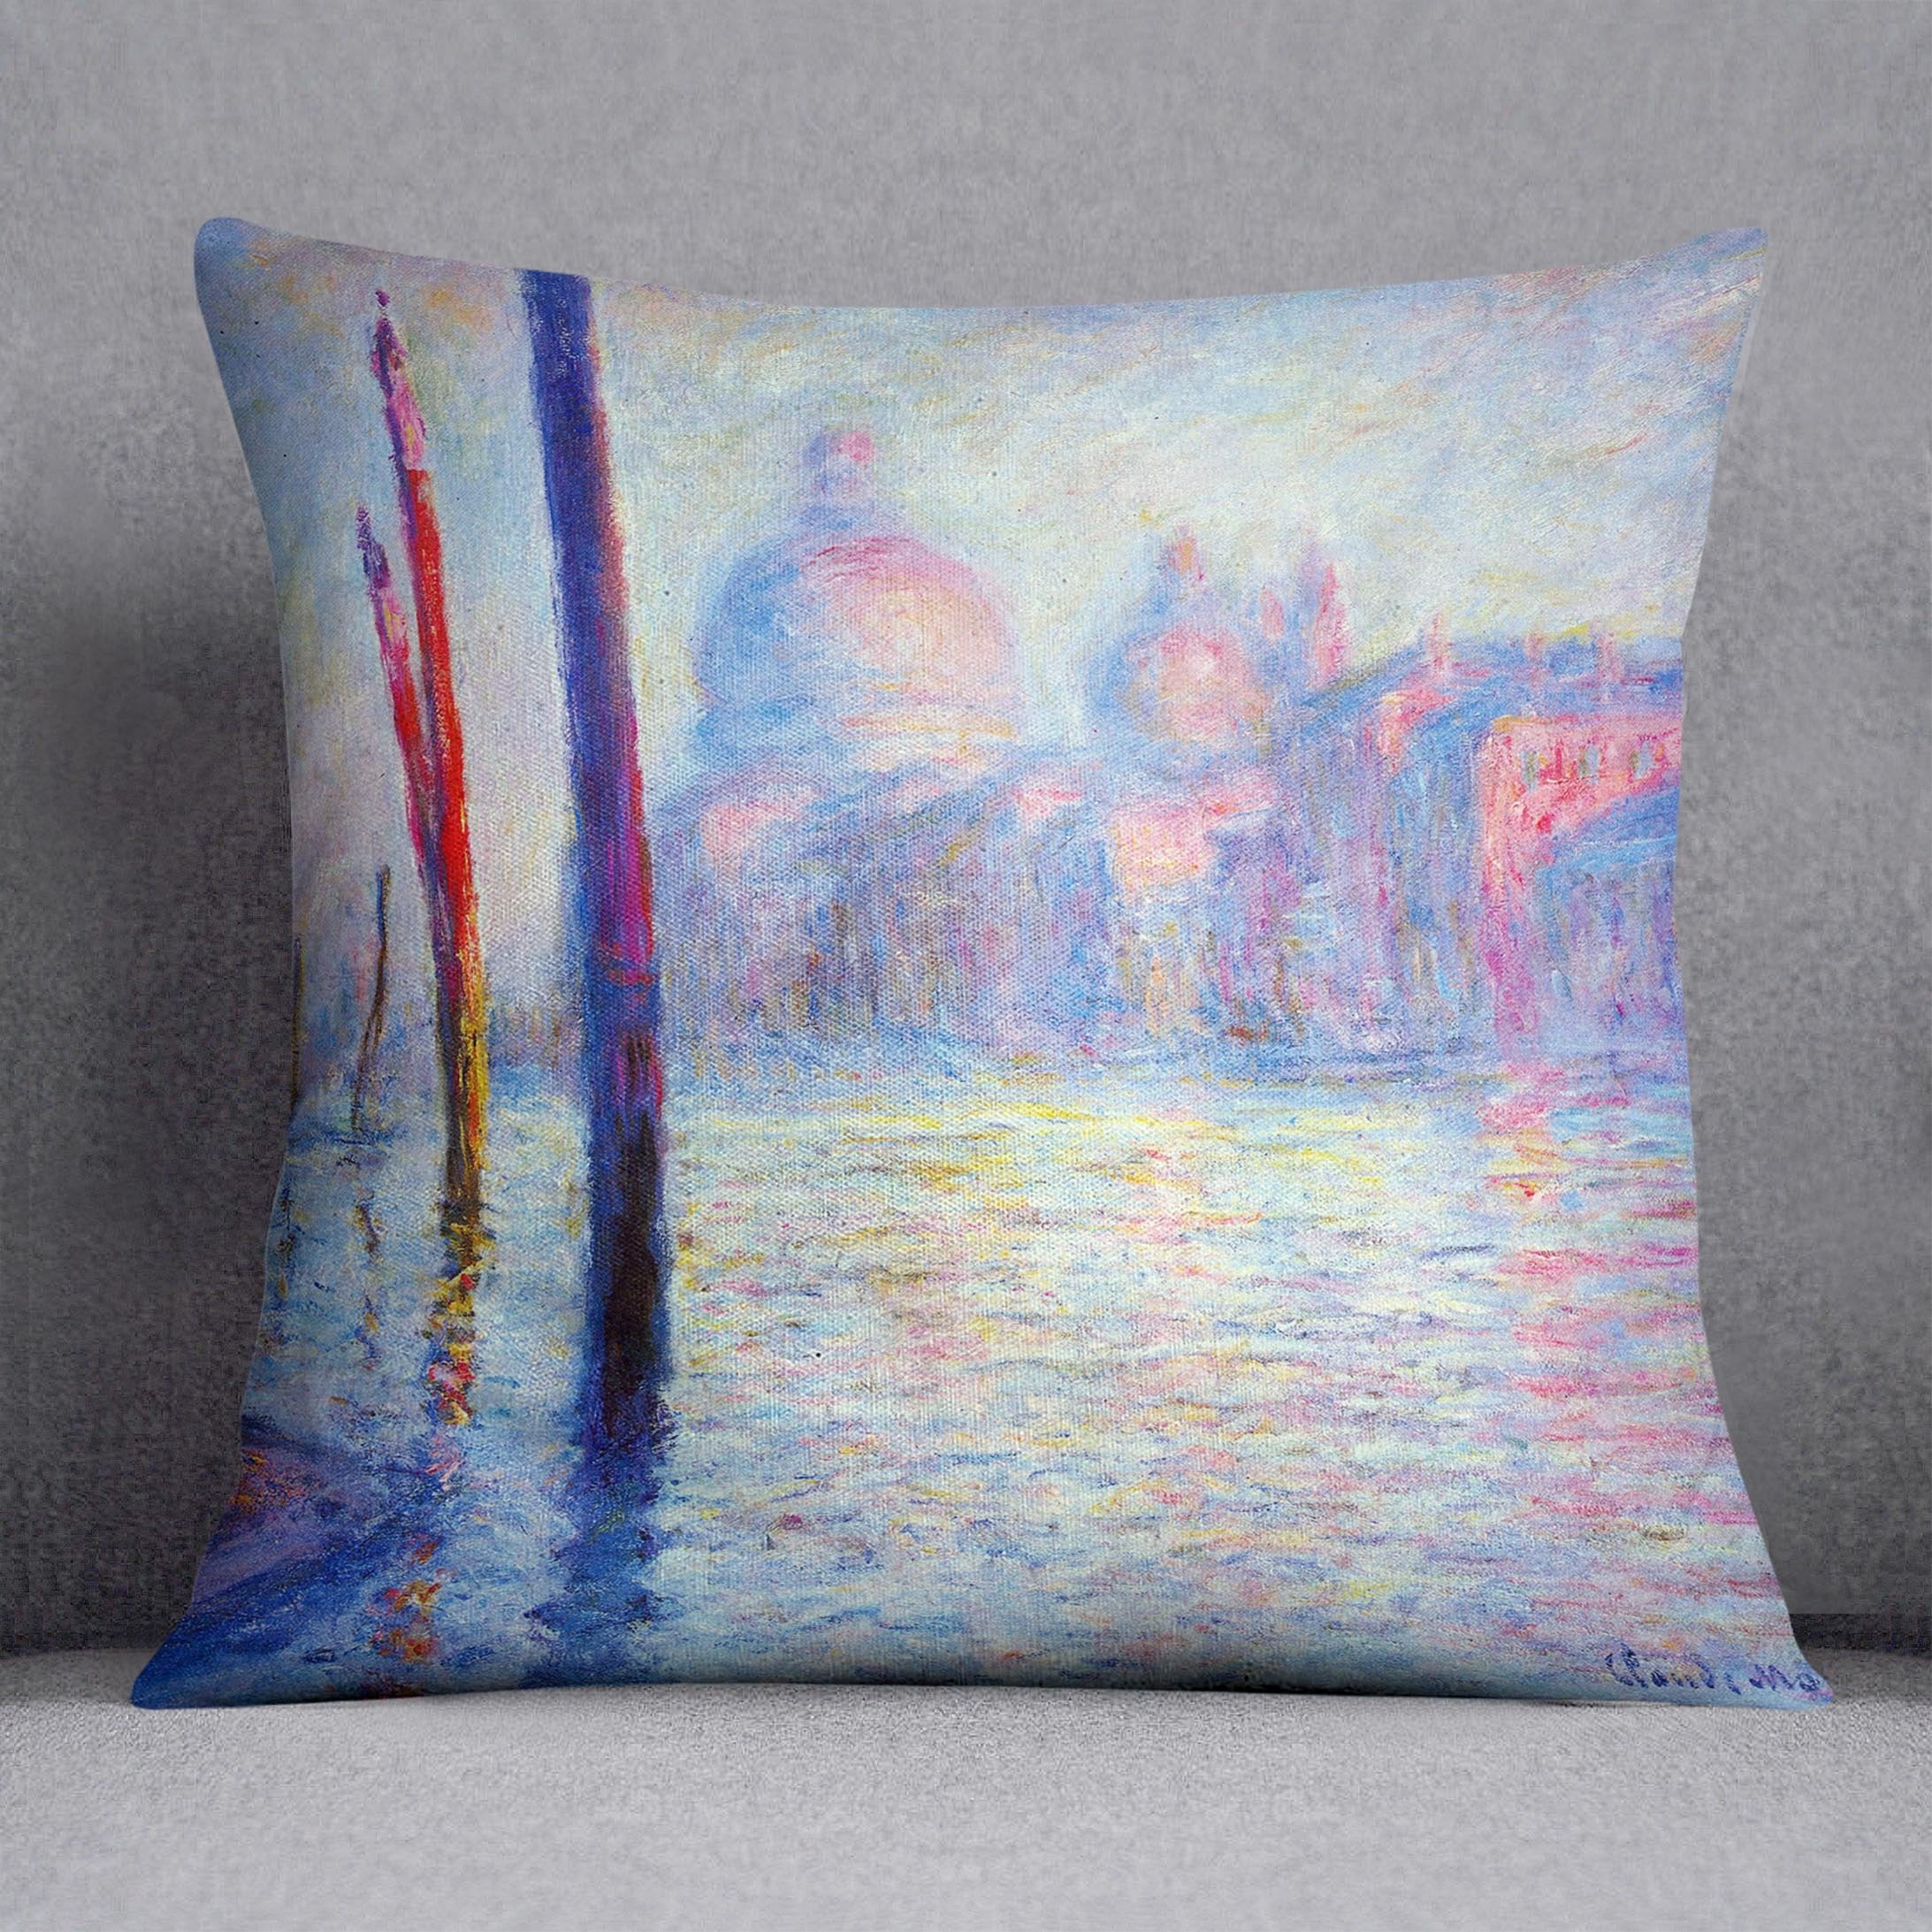 Canal Grand by Monet Throw Pillow